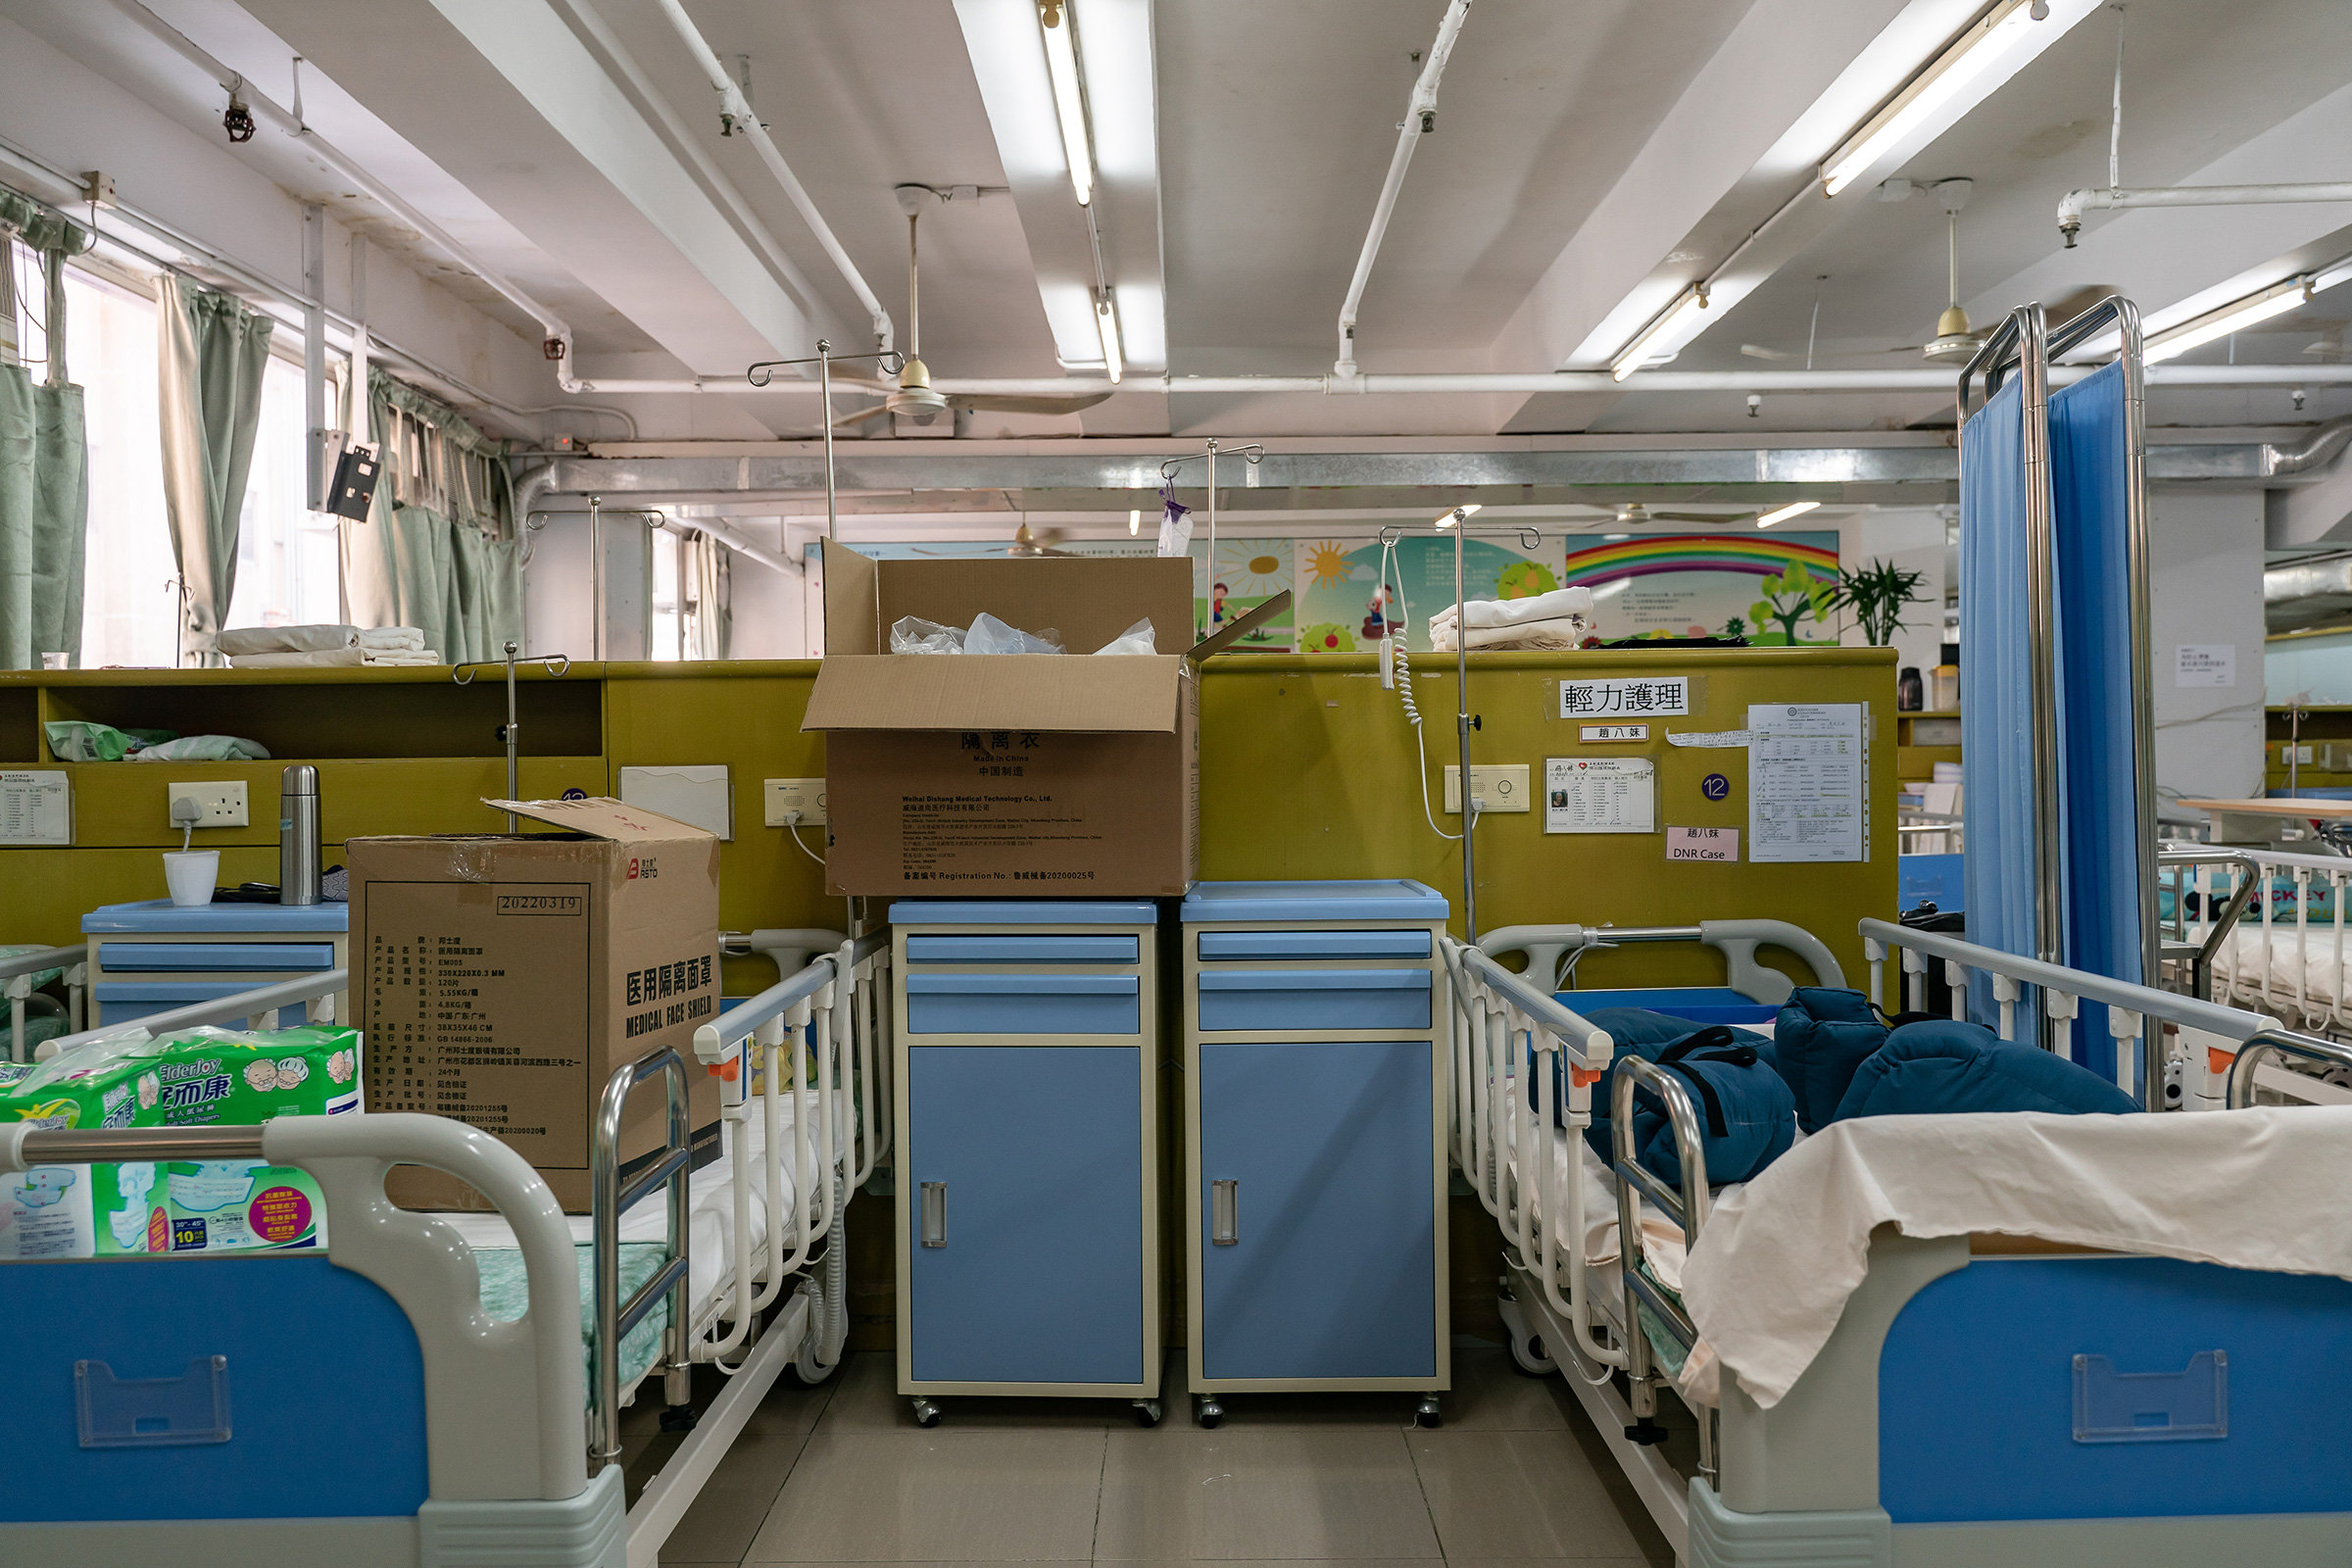 Boxes of supplies pile up on beds normally reserved for residents requiring special care, Kei Tak (Tai Hang) Home for the Aged, on May 6. (Anthony Kwan for TIME)